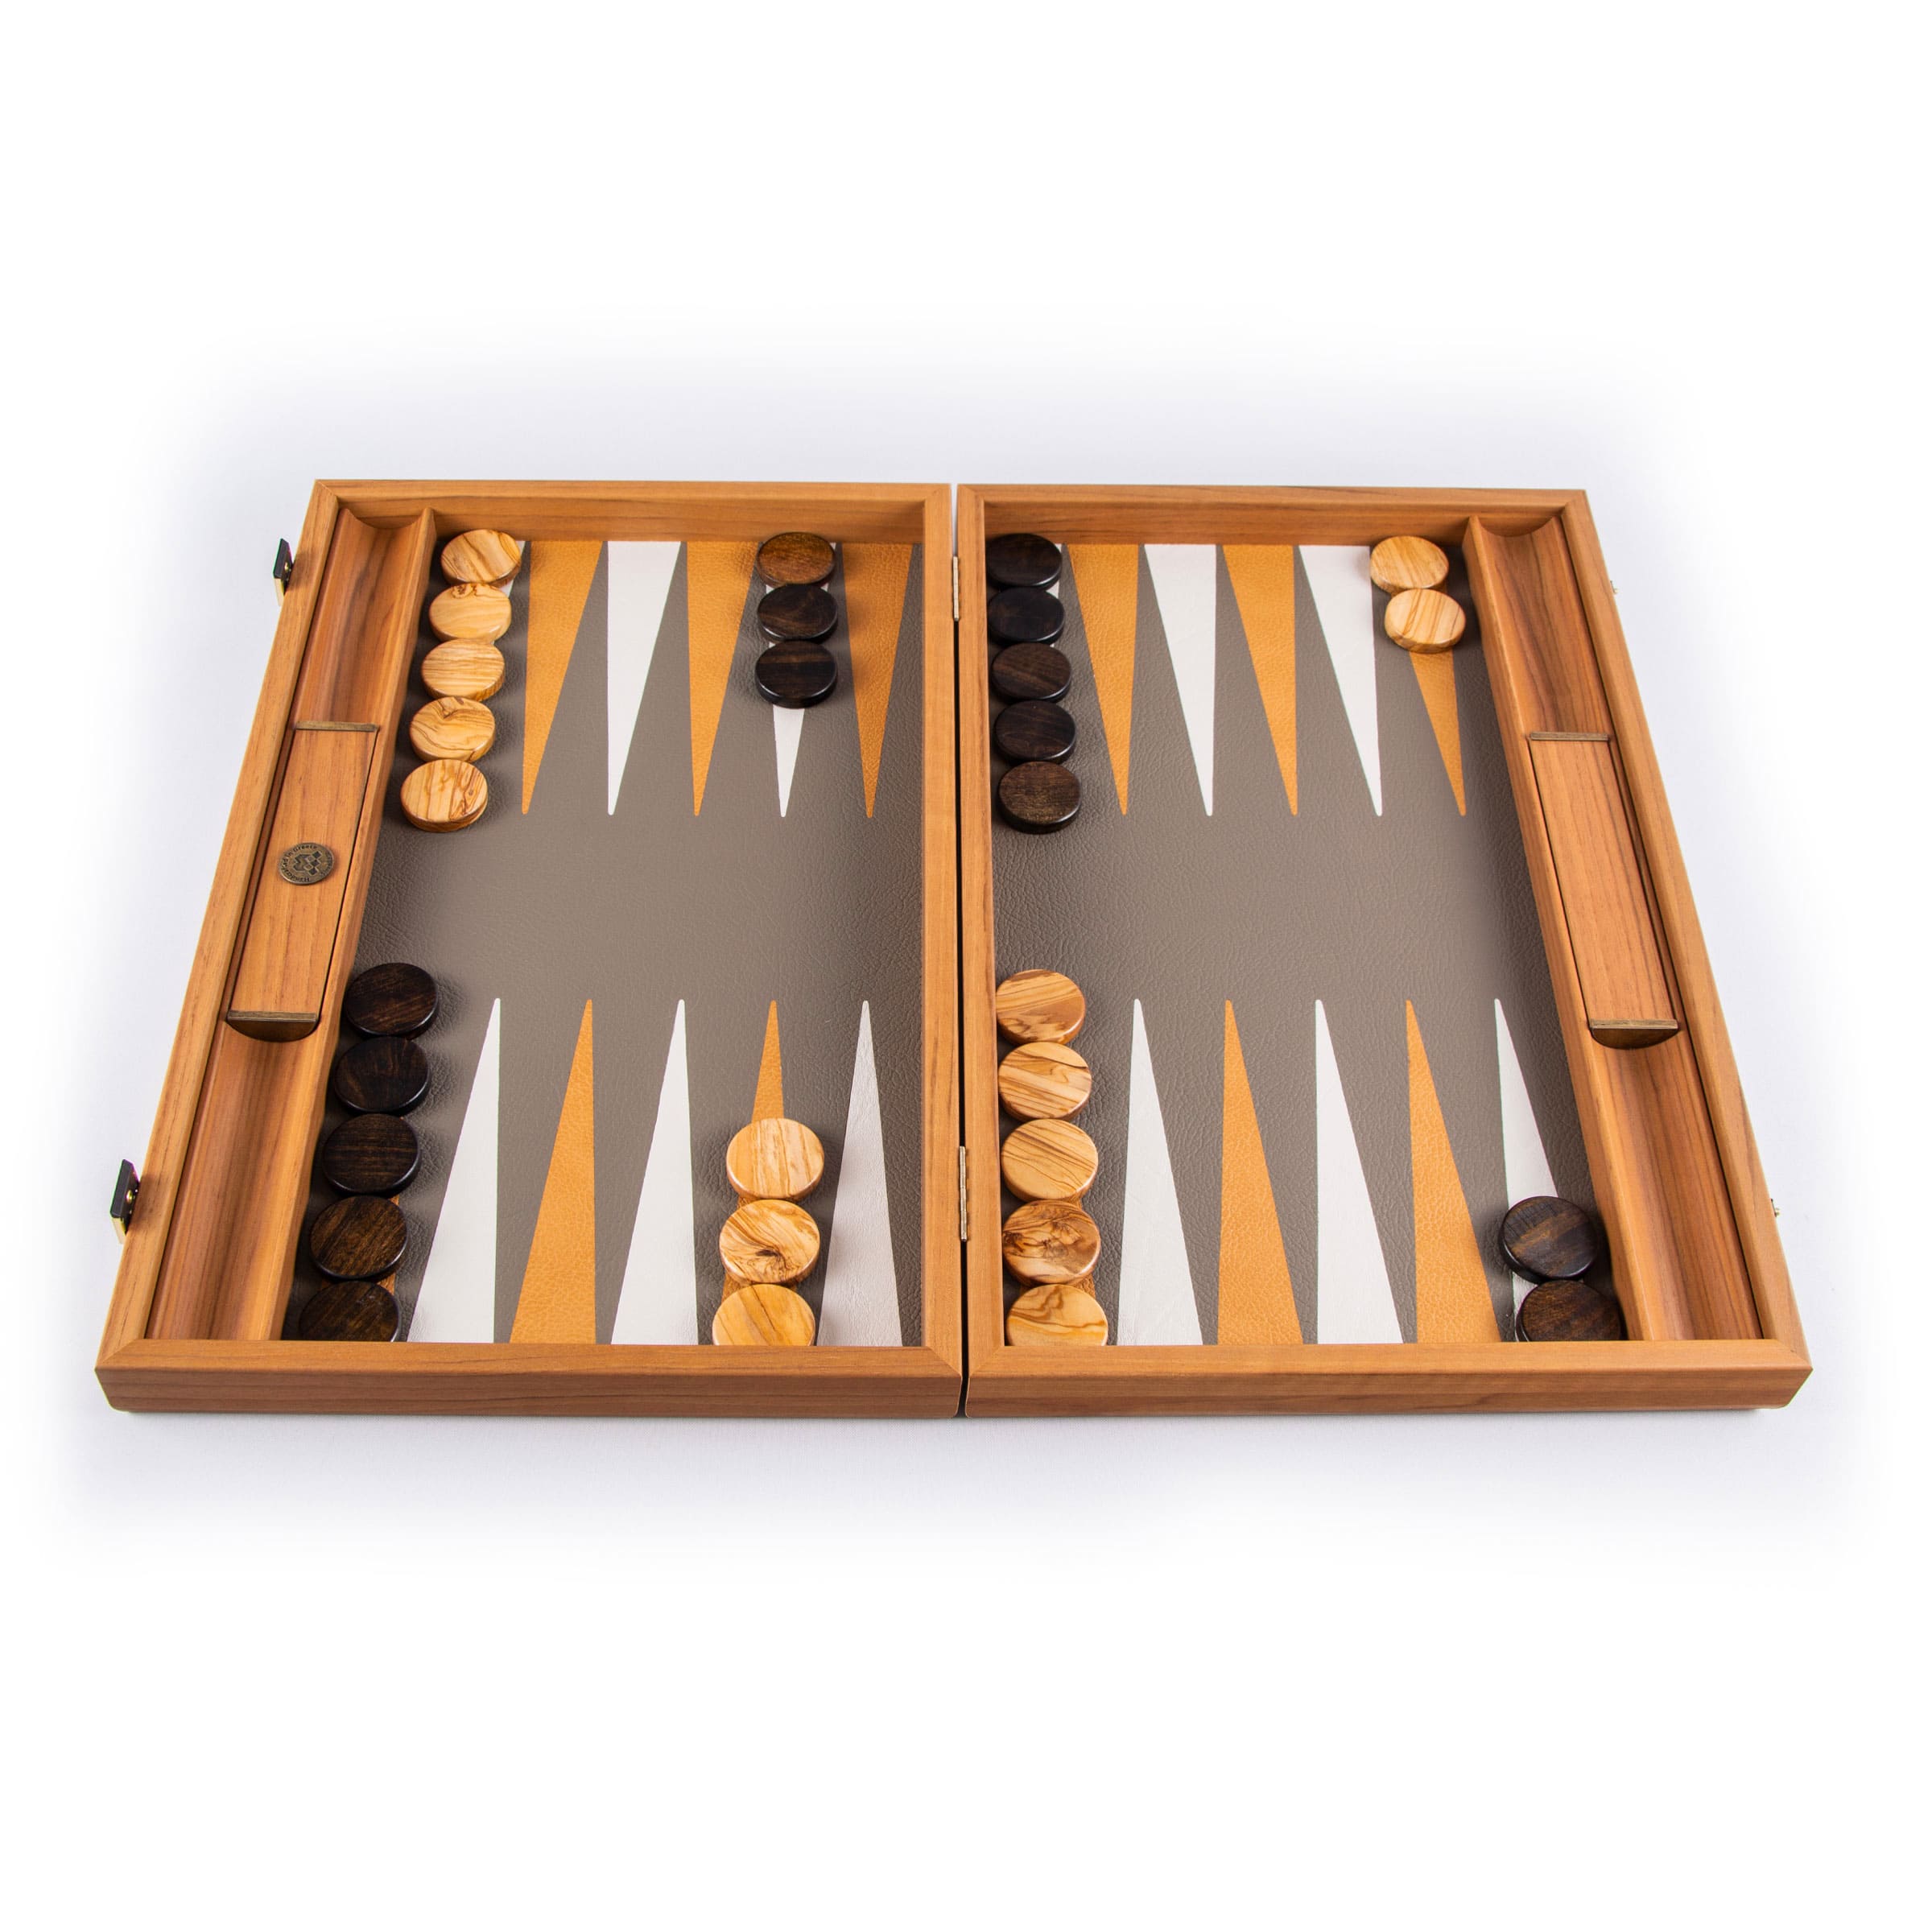 The Manopoulos Grey and Beige Ostrich Backgammon Set